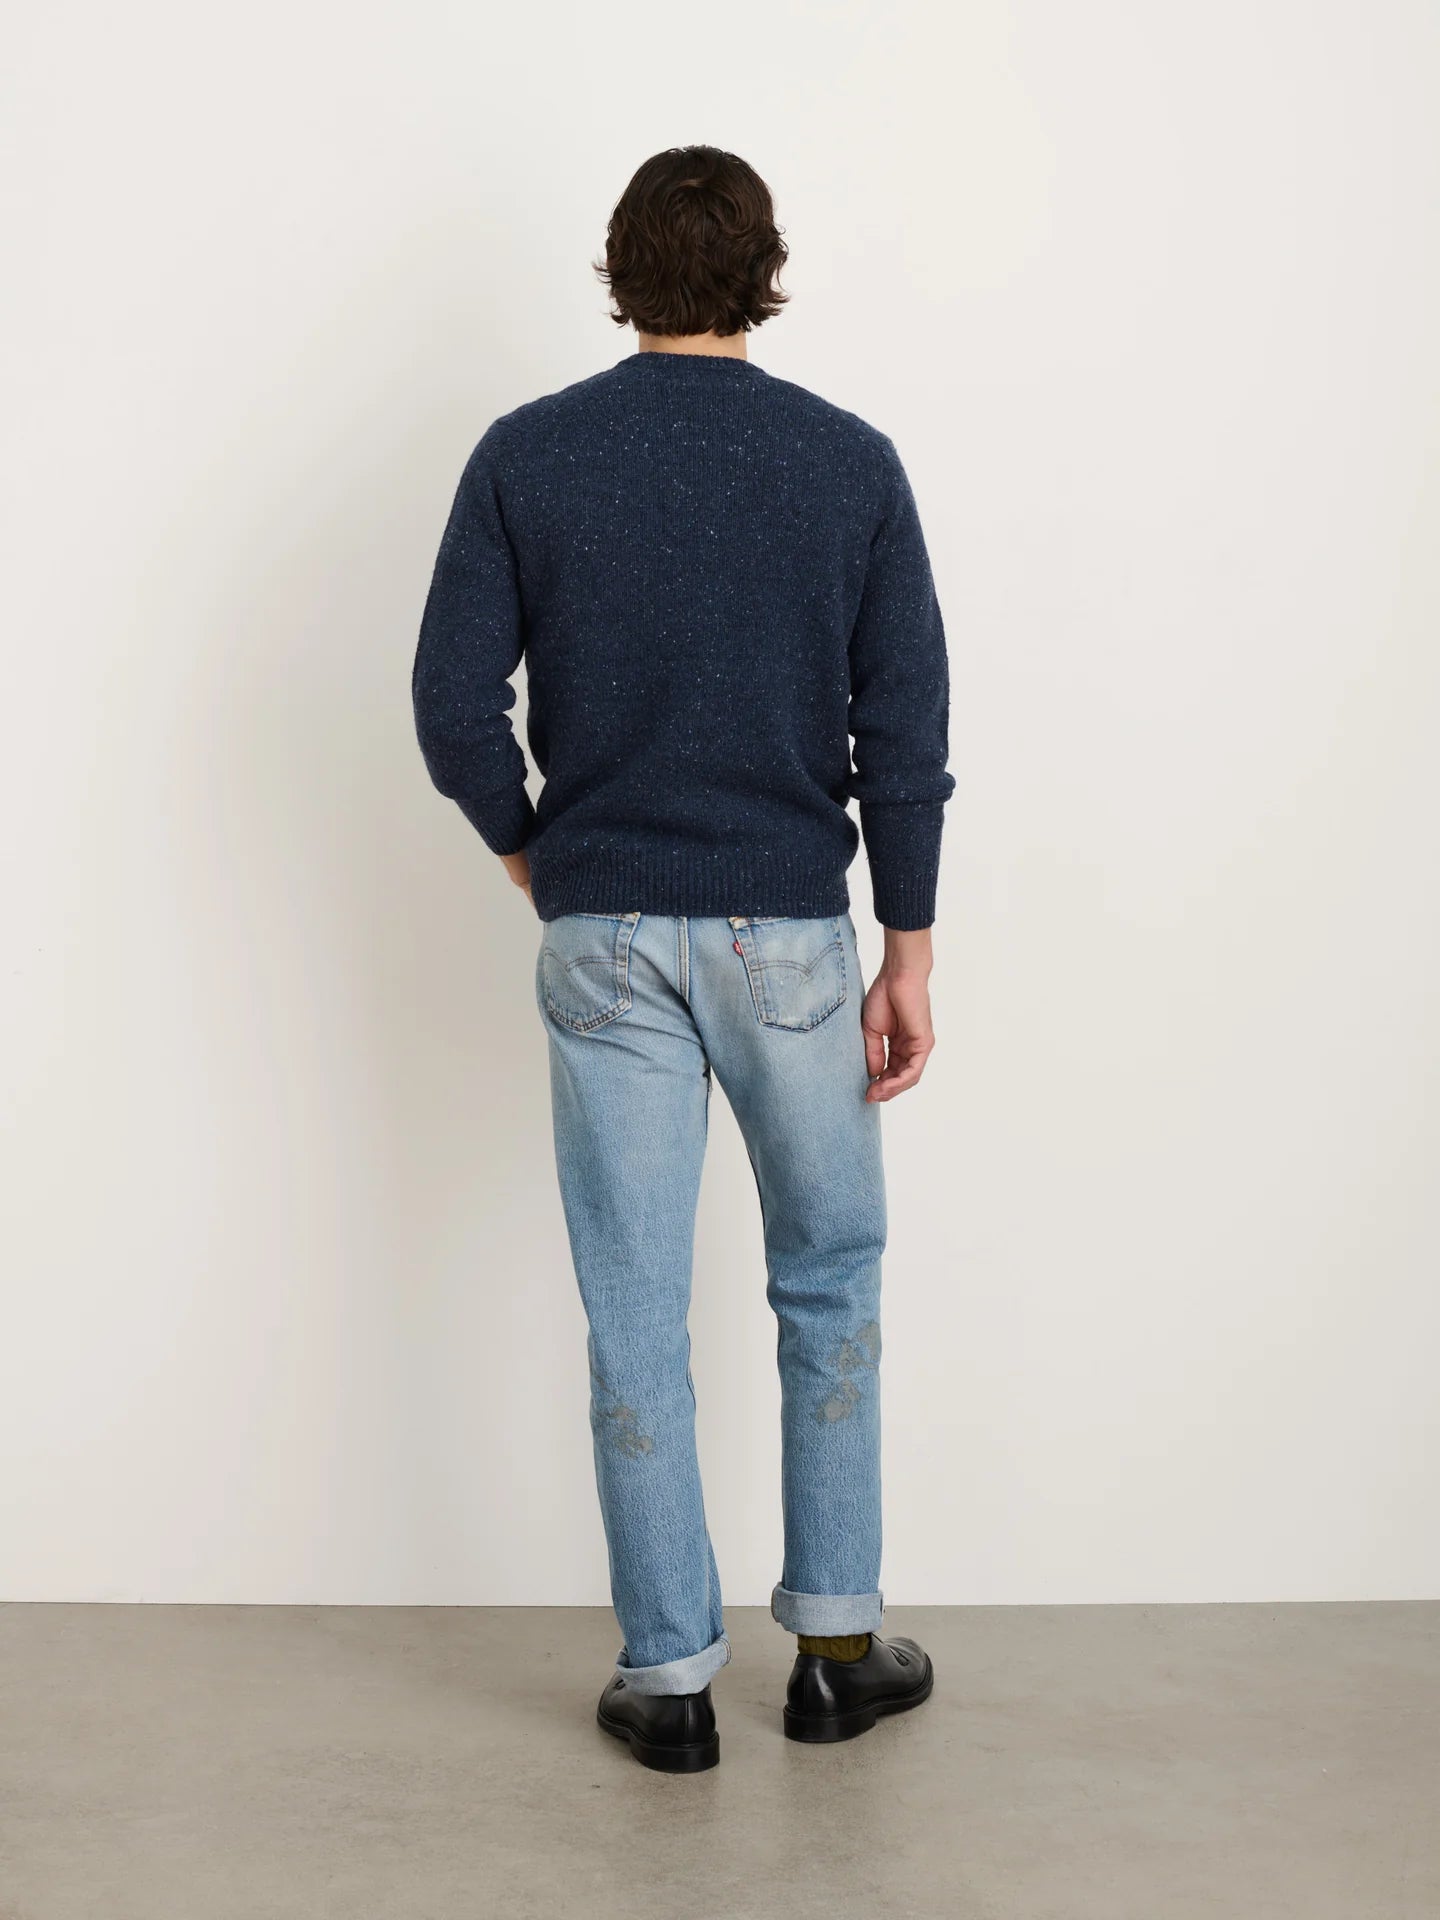 Alex Mill Downing Crewneck in Navy Wool Donegal